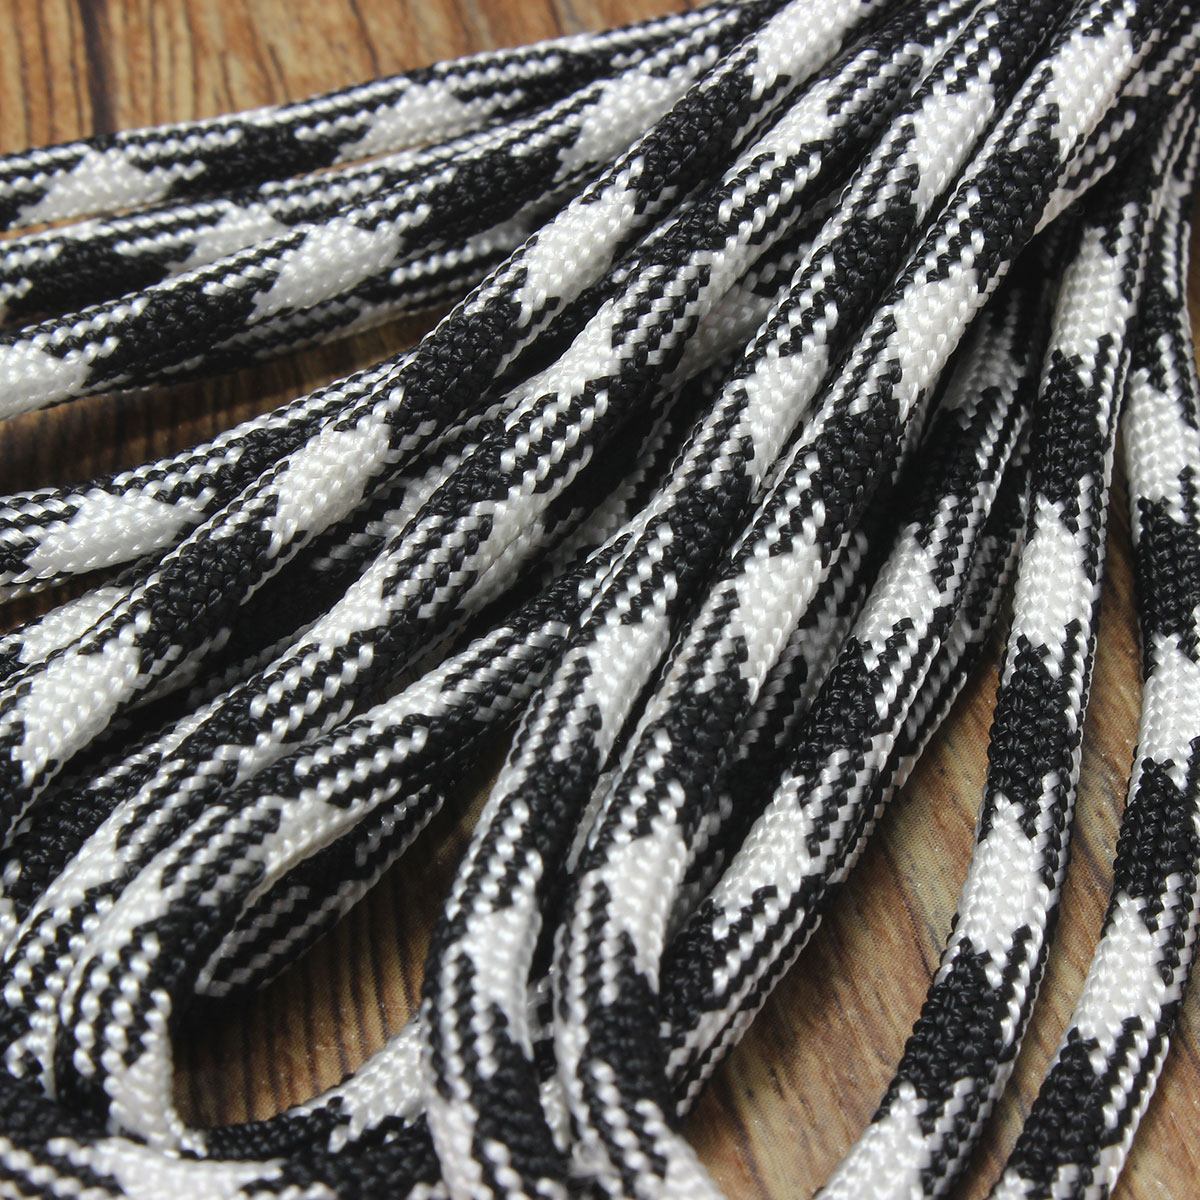 15ft-5m-7-Inner-Strand-505-550-Mil-Survival-Paracord-Bushcraft-Survival-Cord-Lanyard-Rope-Type-III-1349688-8